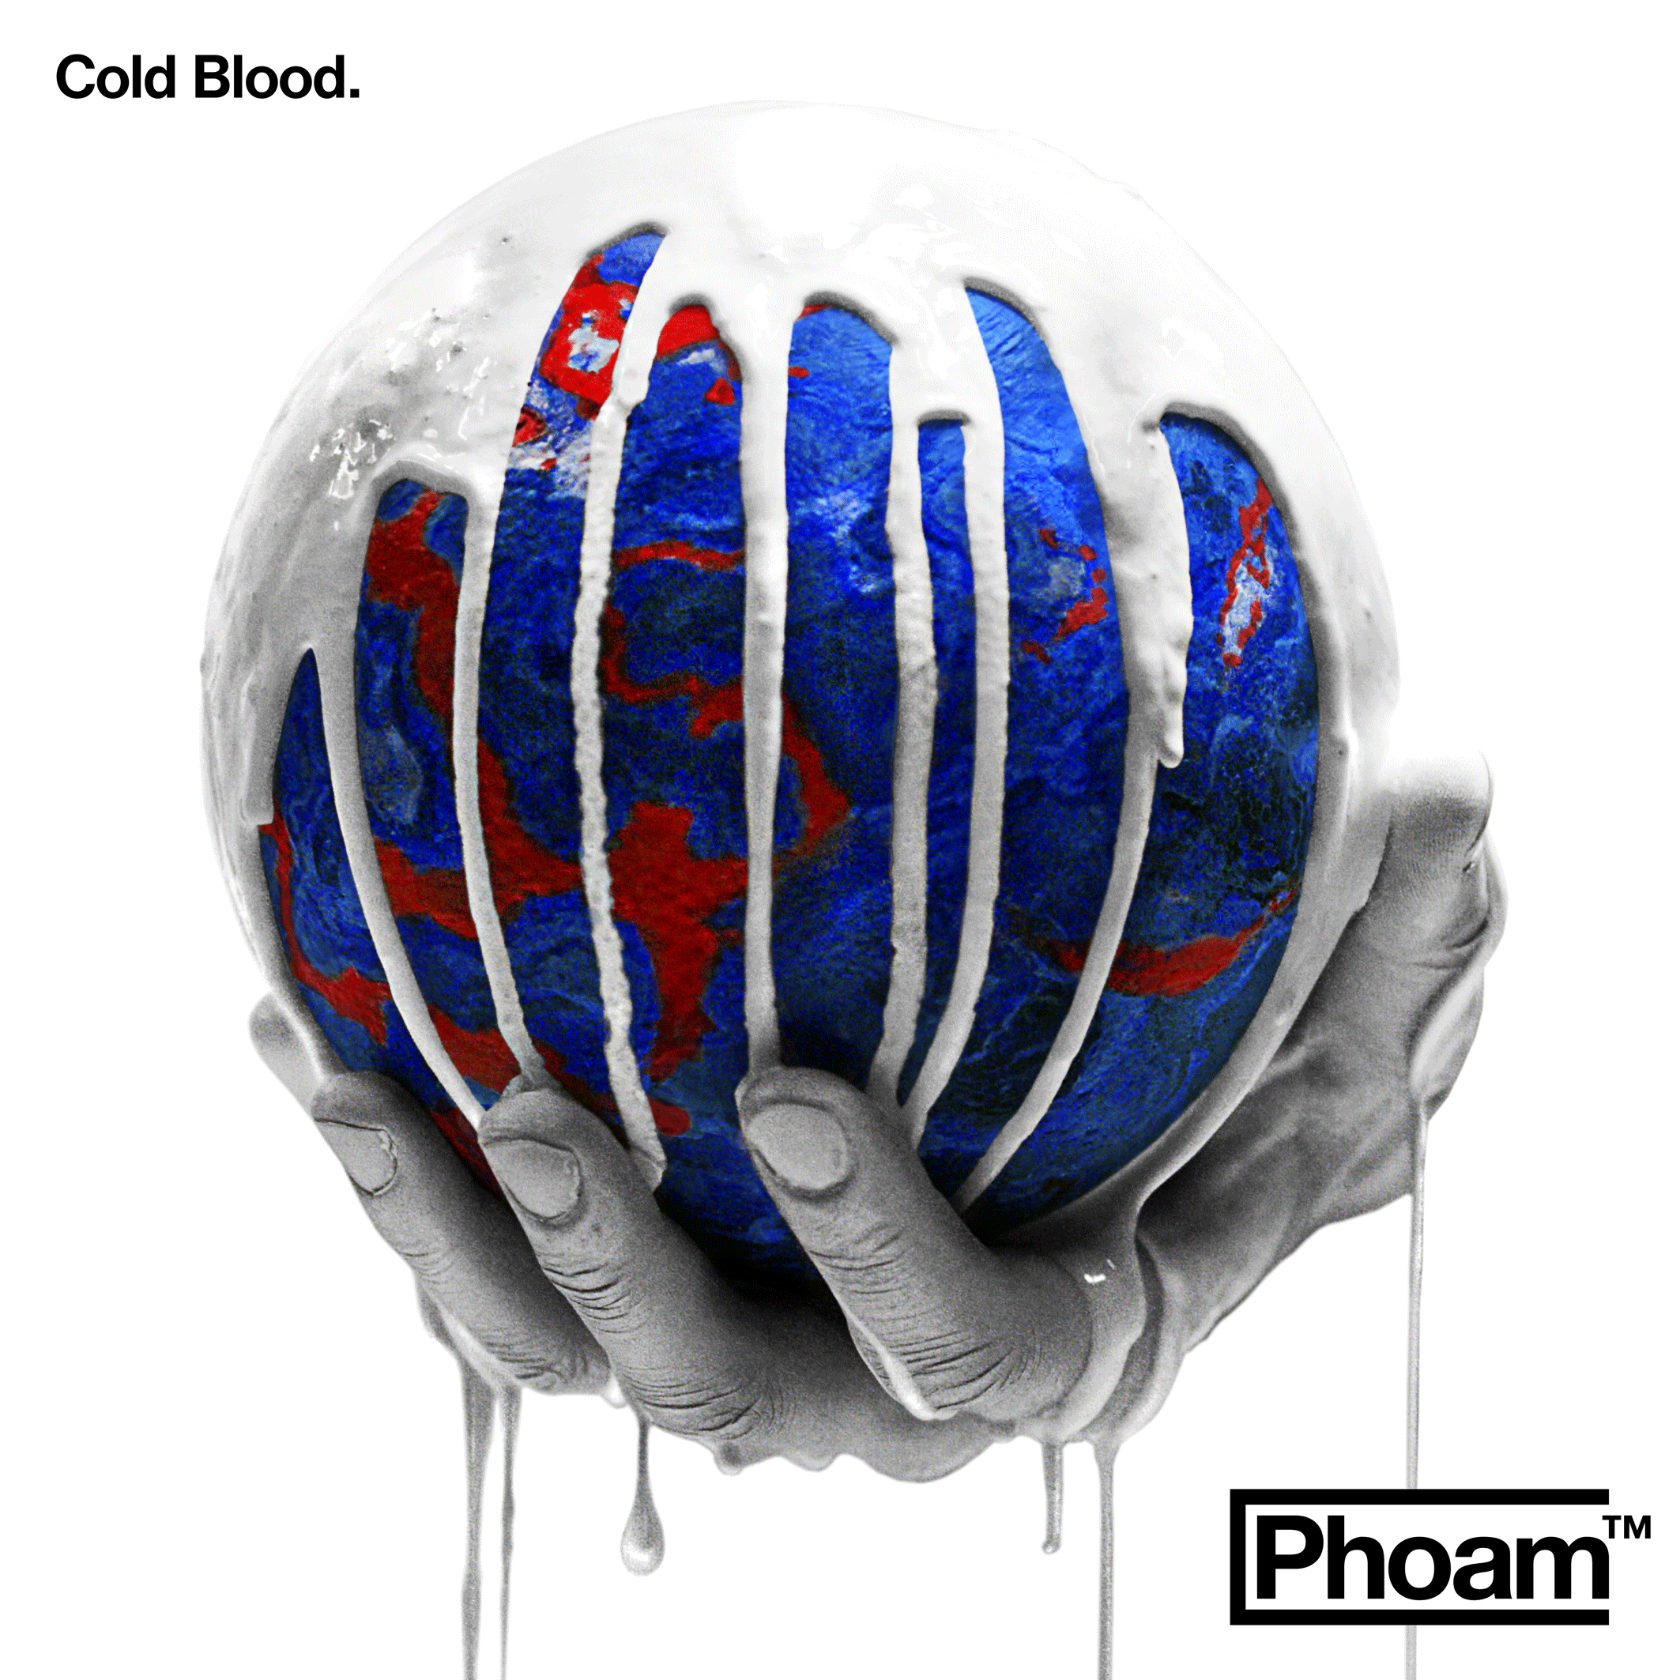 Phoam: Cold Blood (Cover, Single)